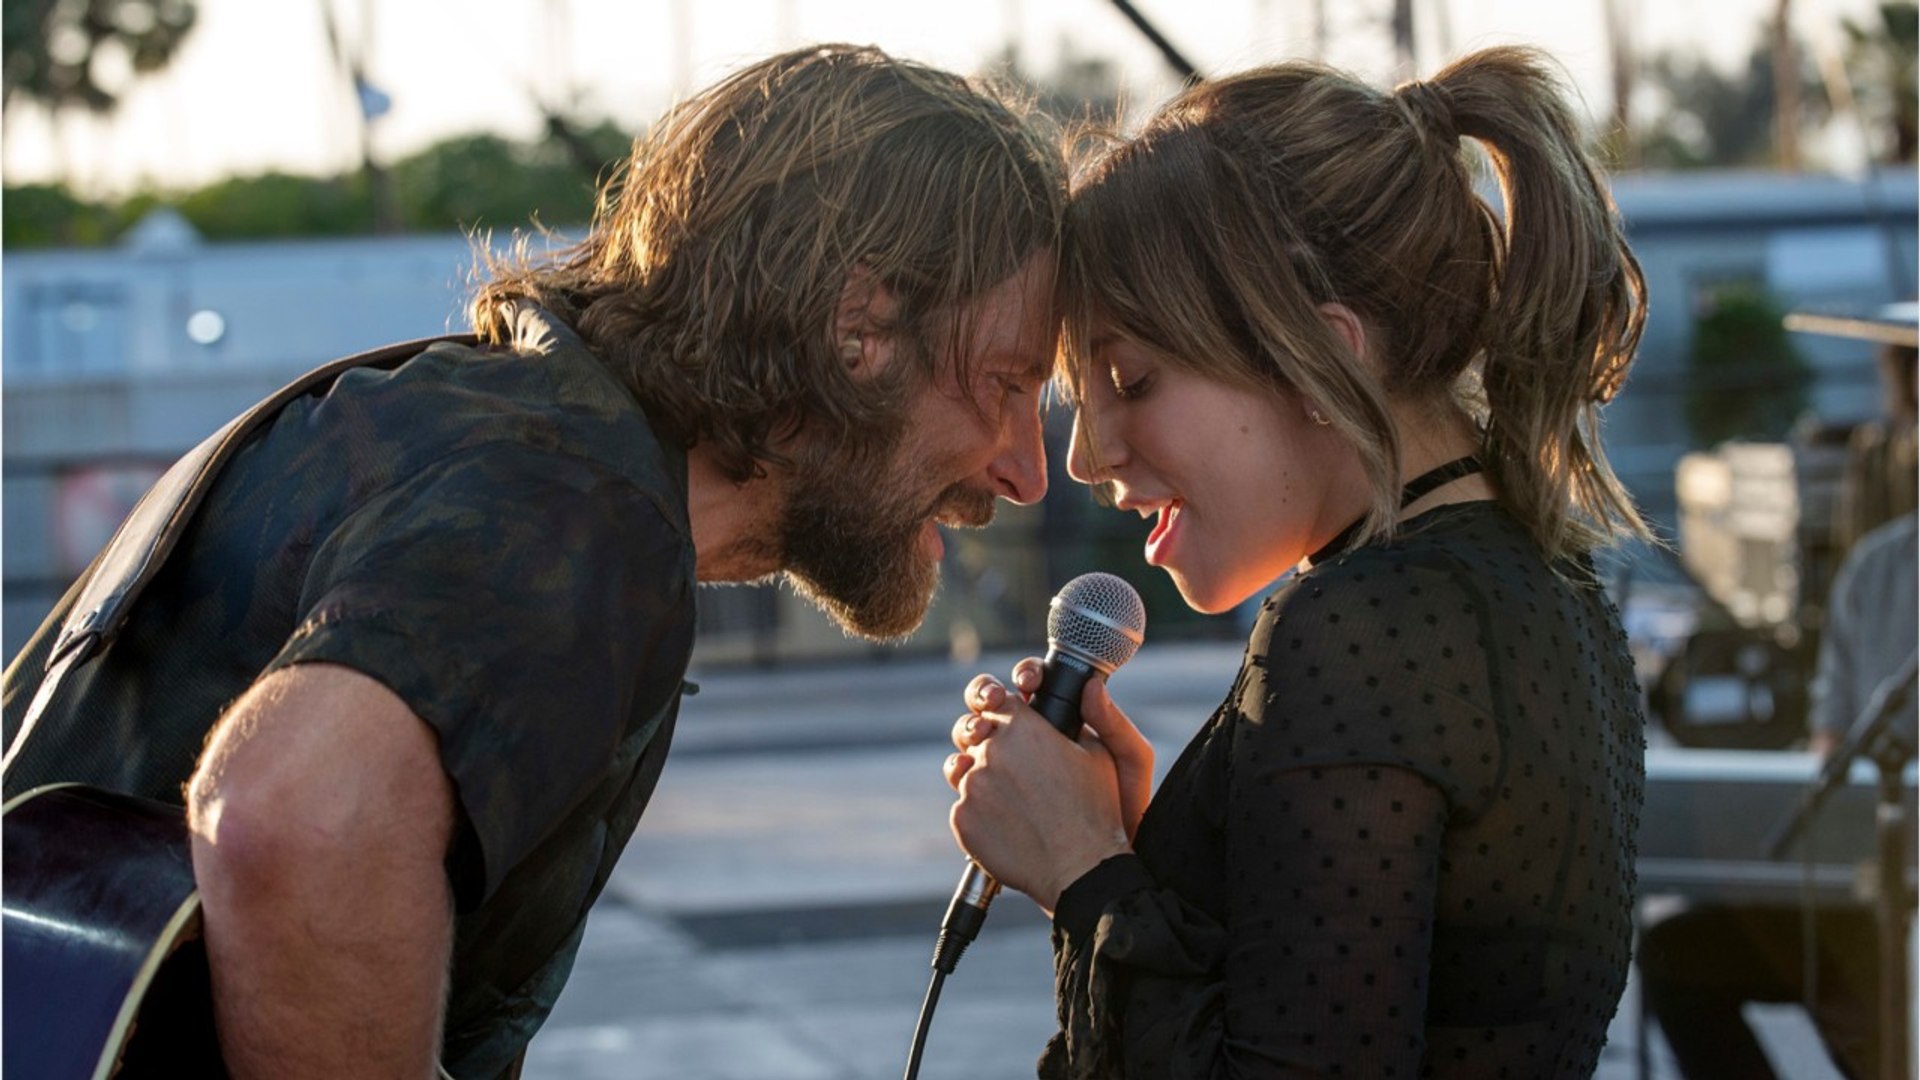 ⁣A Star is Born Review: Cooper & Gaga Write A (Not So) Bad Romance